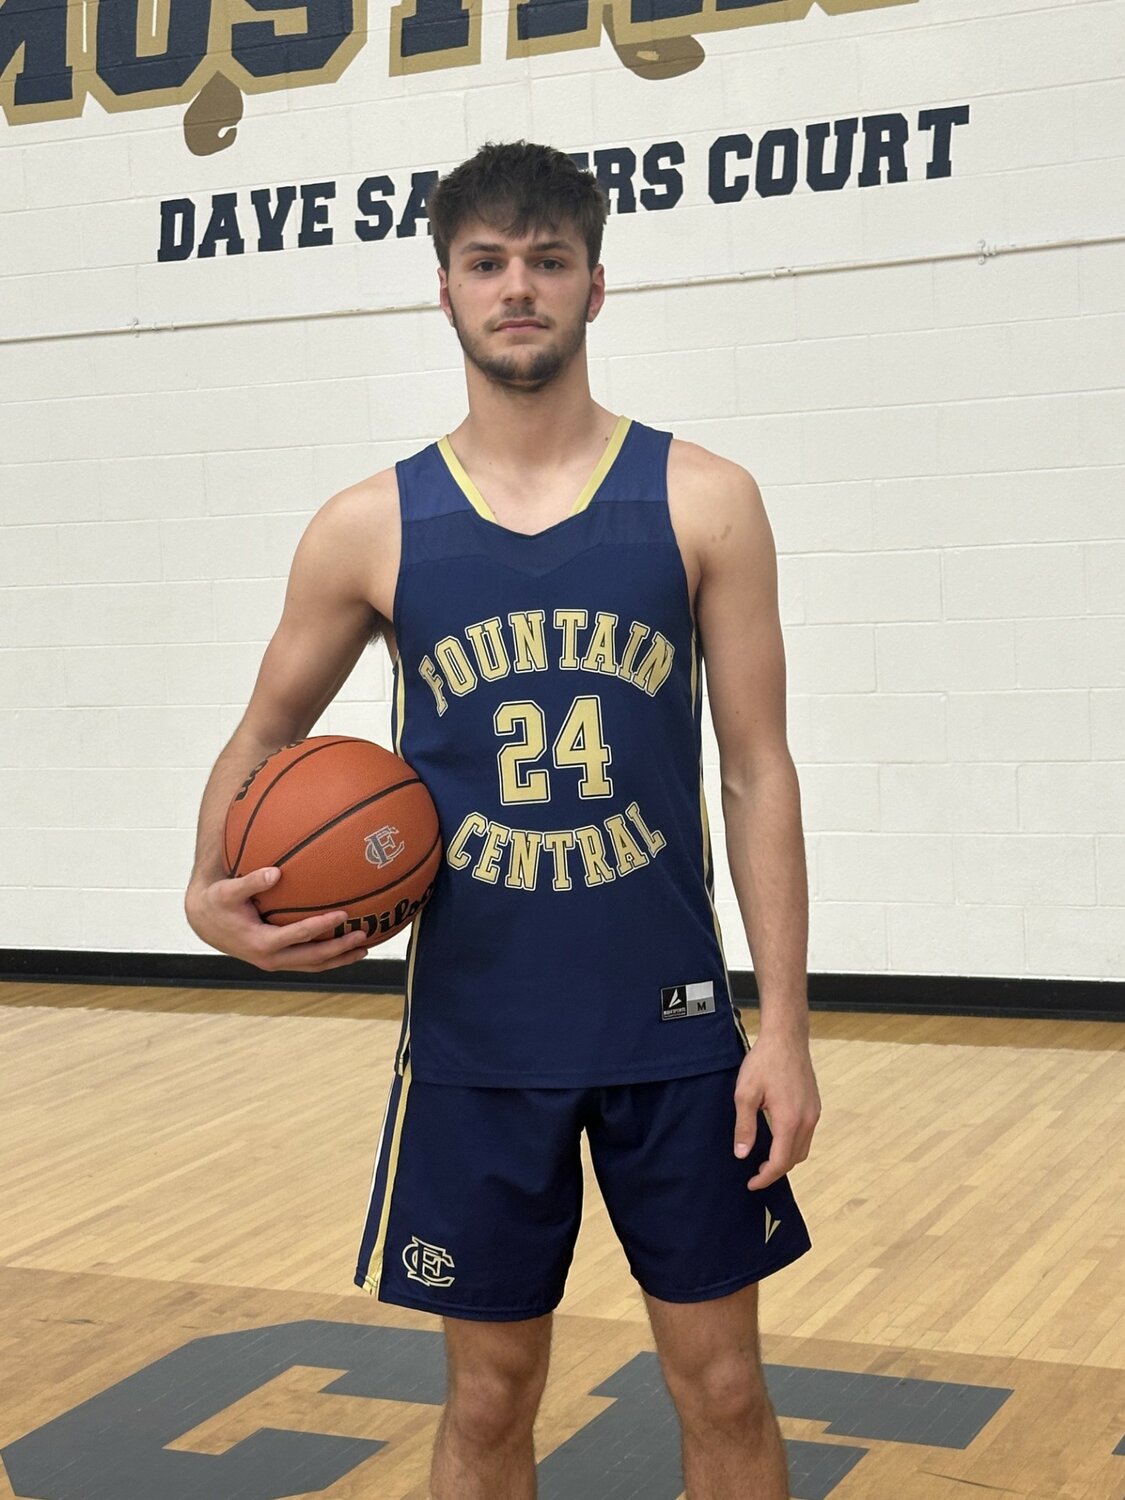 Fountain Central's Isaac Gayler averaged 17.2 points and 7.5 rebounds per game his senior season and is the 2023-24 Journal Review Boys Basketball Player of the Year.